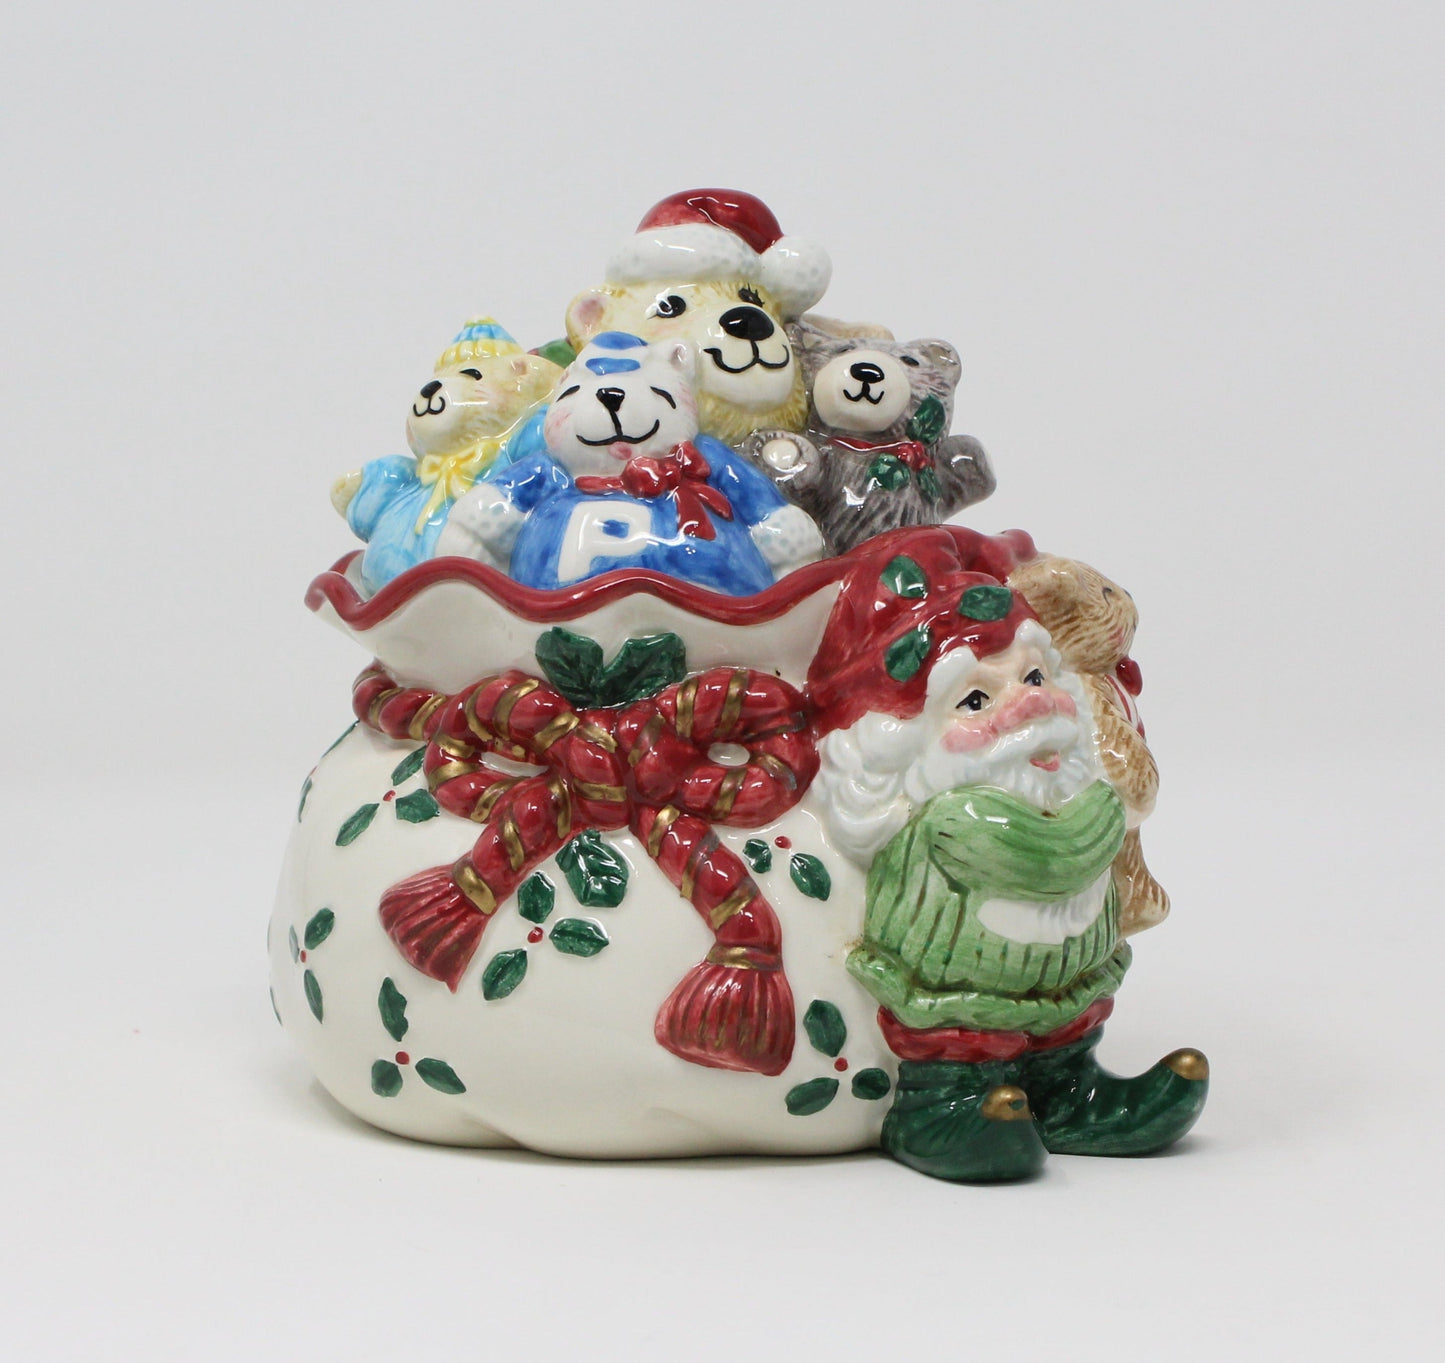 Trinket Box, Fitz and Floyd, Holiday Elf Collection, Porcelain, 2003